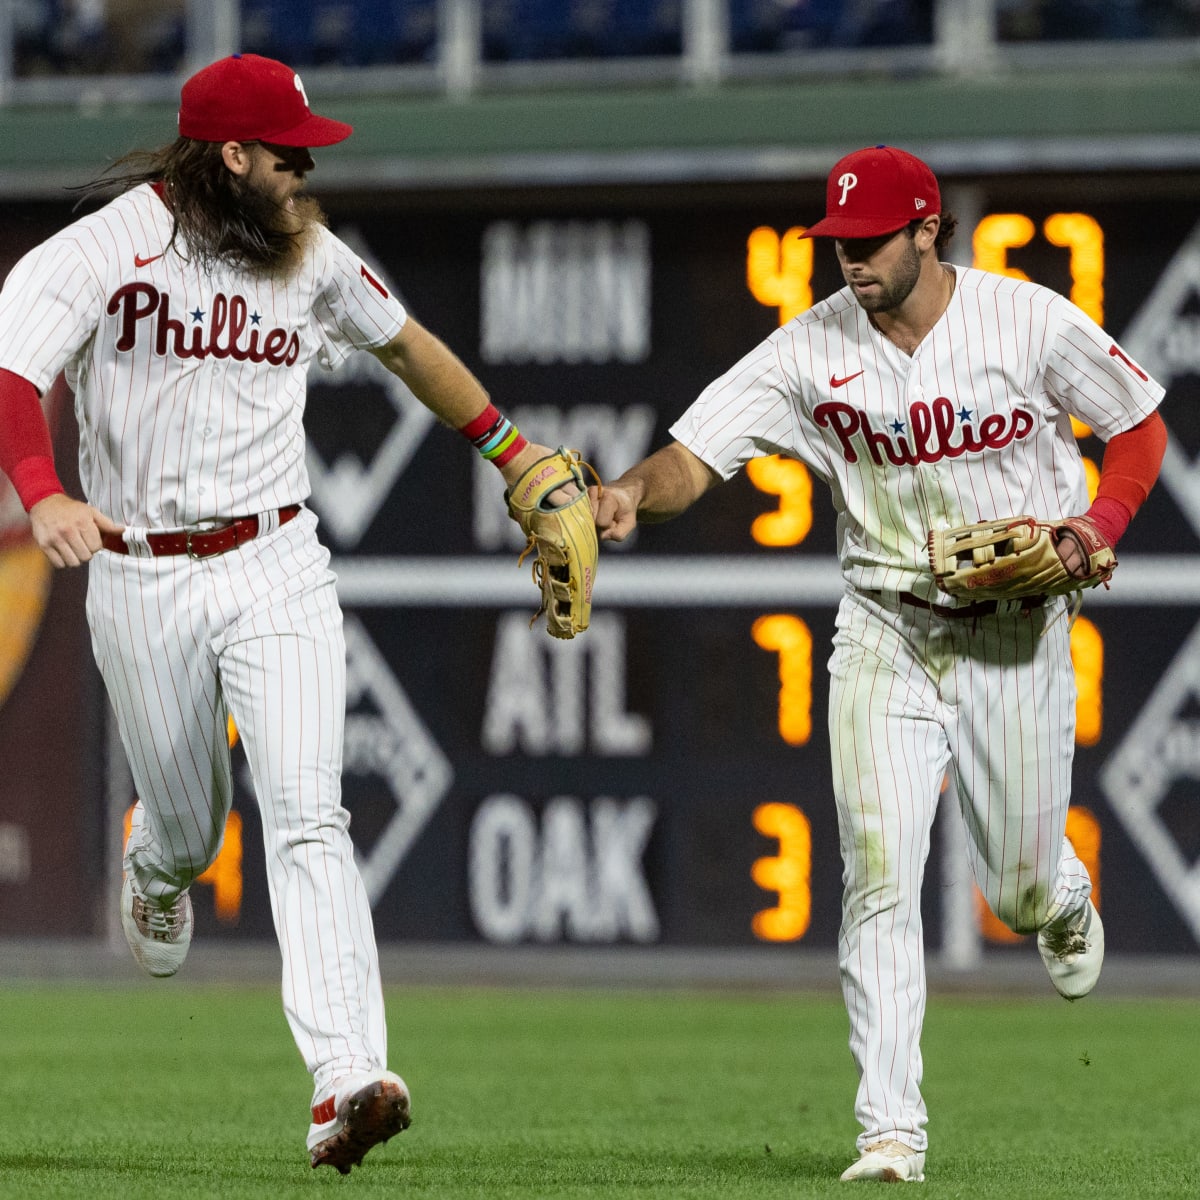 Phillies: With Hall injury, Sosa needs to be a part of the lineup